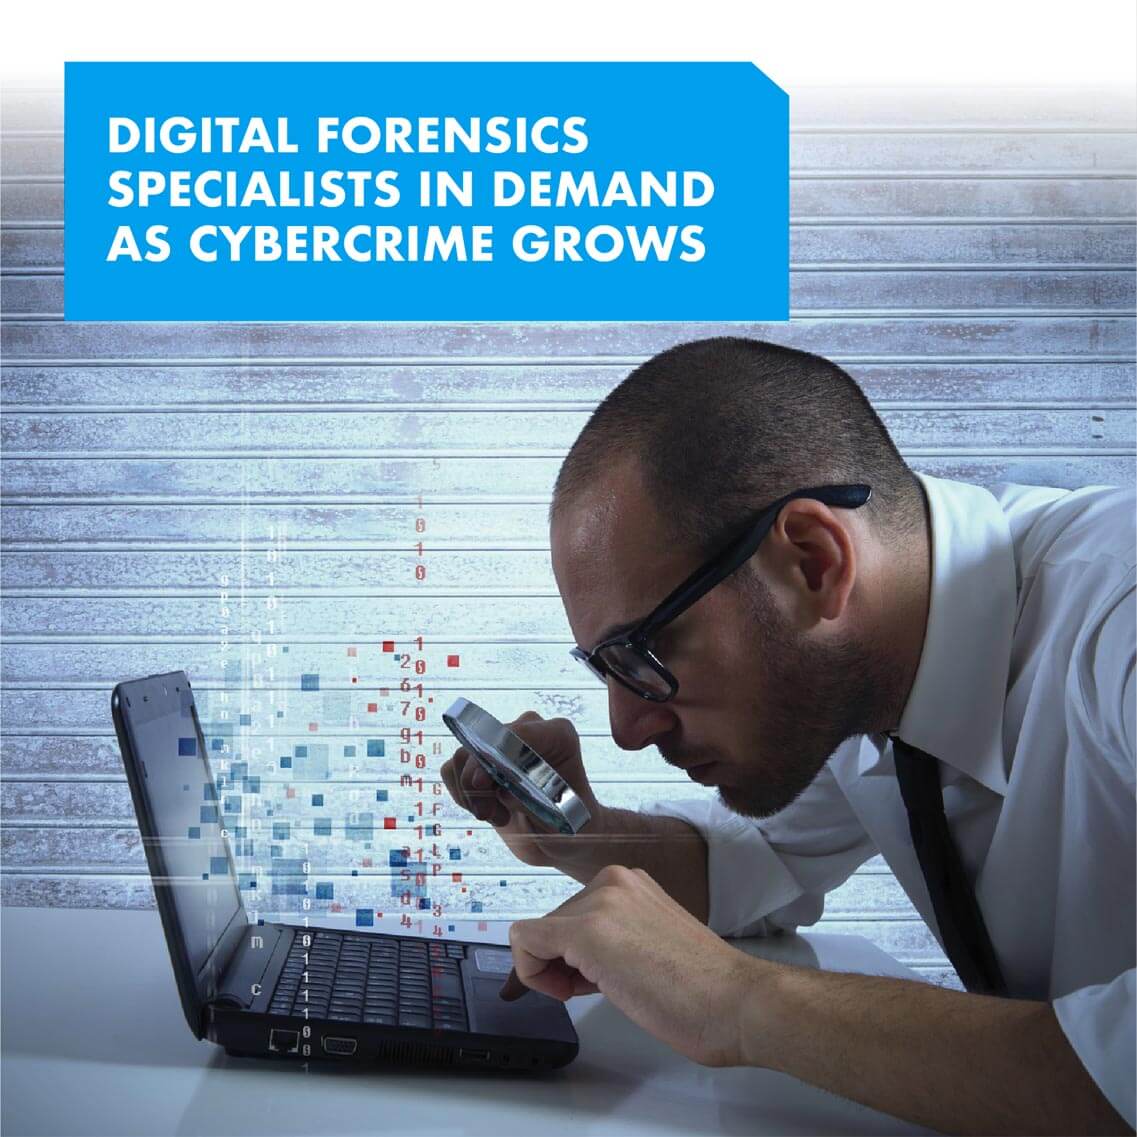 Digital Forensics Specialists in Demand as Cybercrime Grows